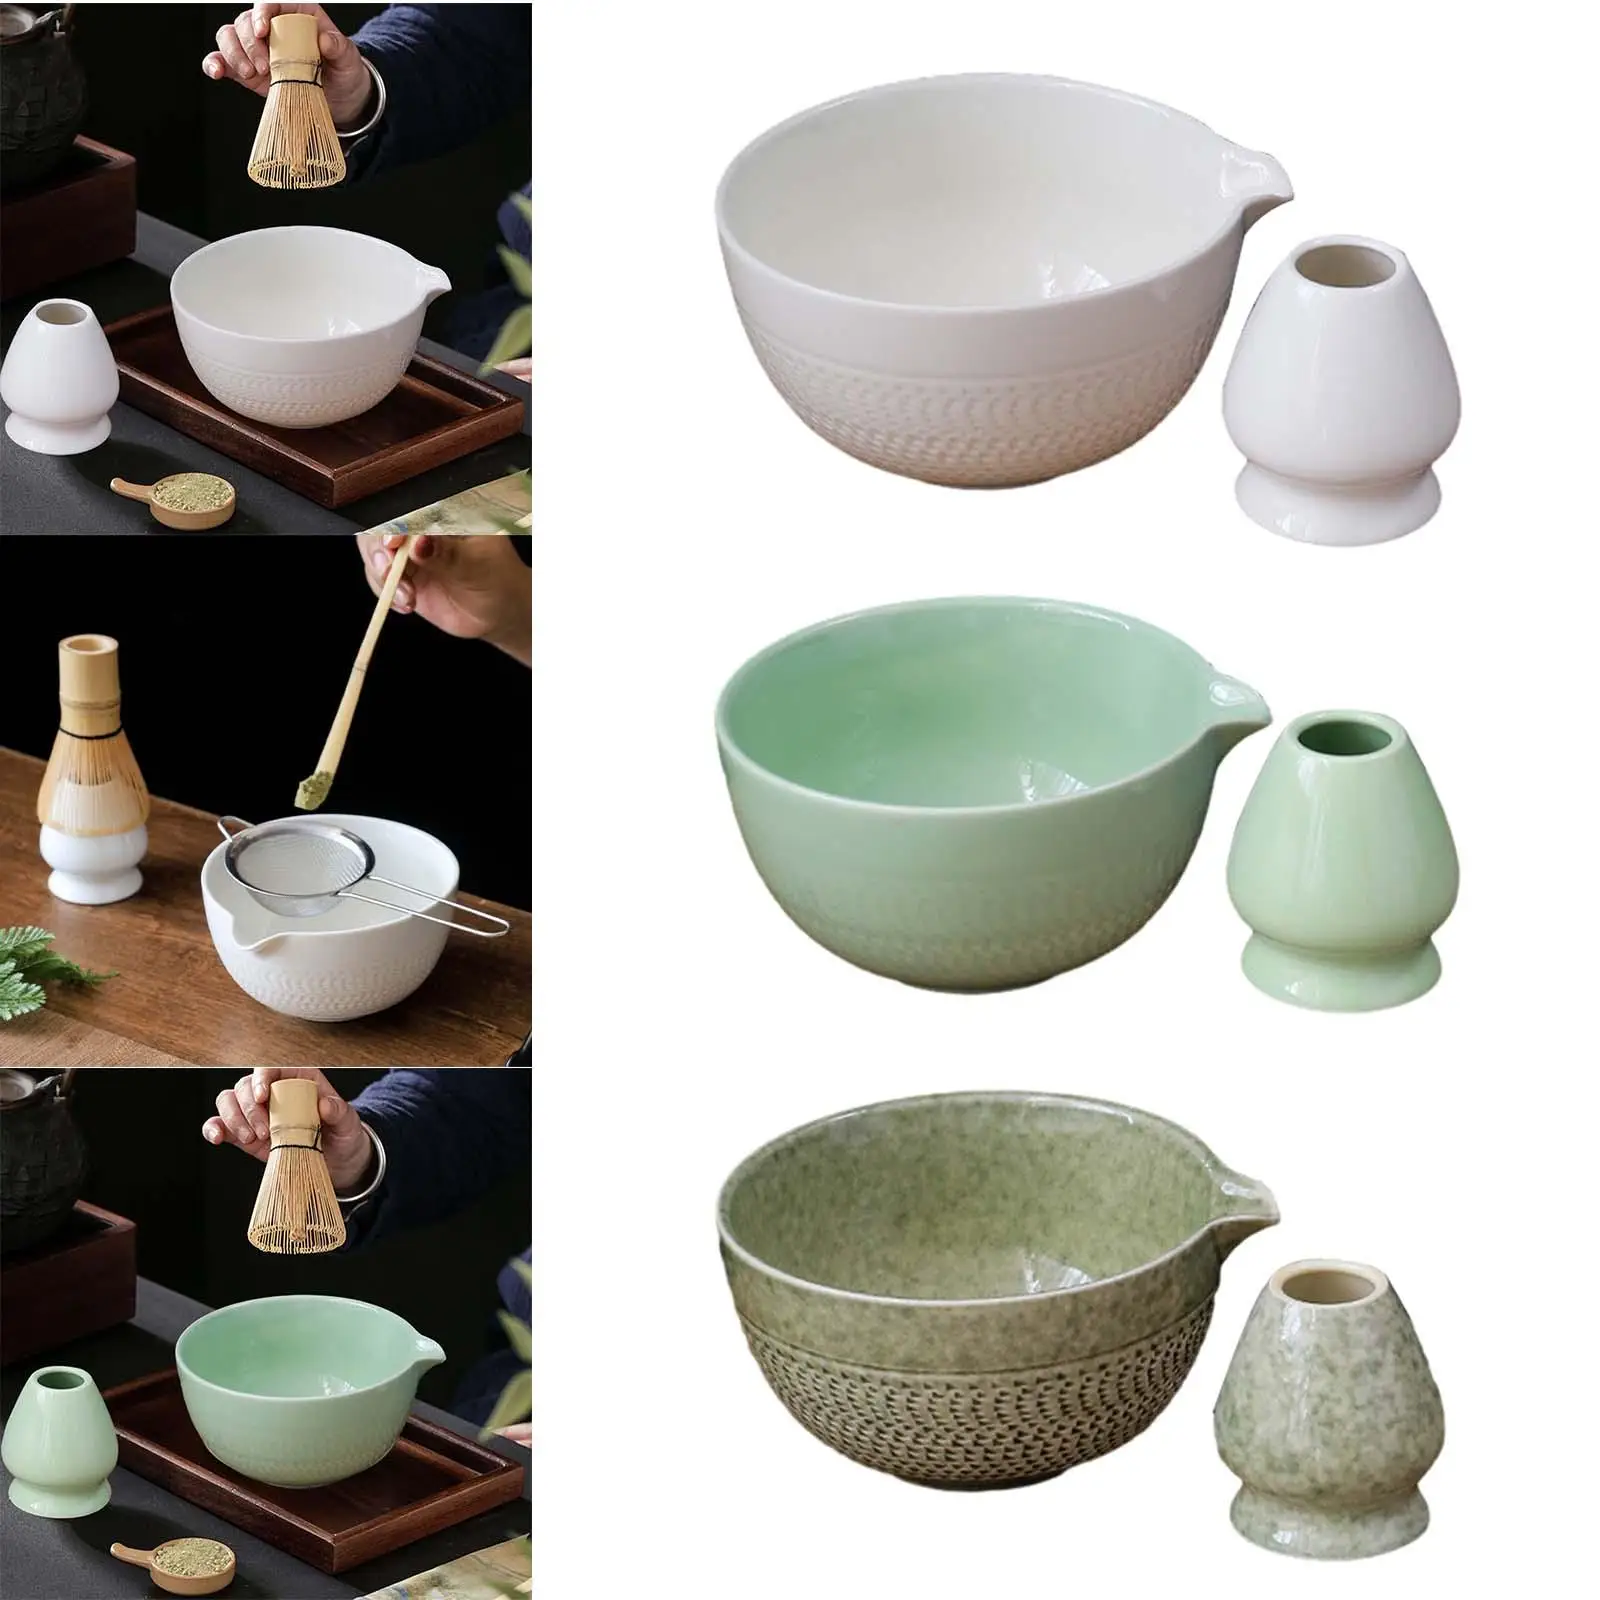 2x Traditional Japanese Matcha Bowl with Whisk Holder 500ml Matcha Ceramic Bowl for Holiday Traditional Ceremonial Office Home